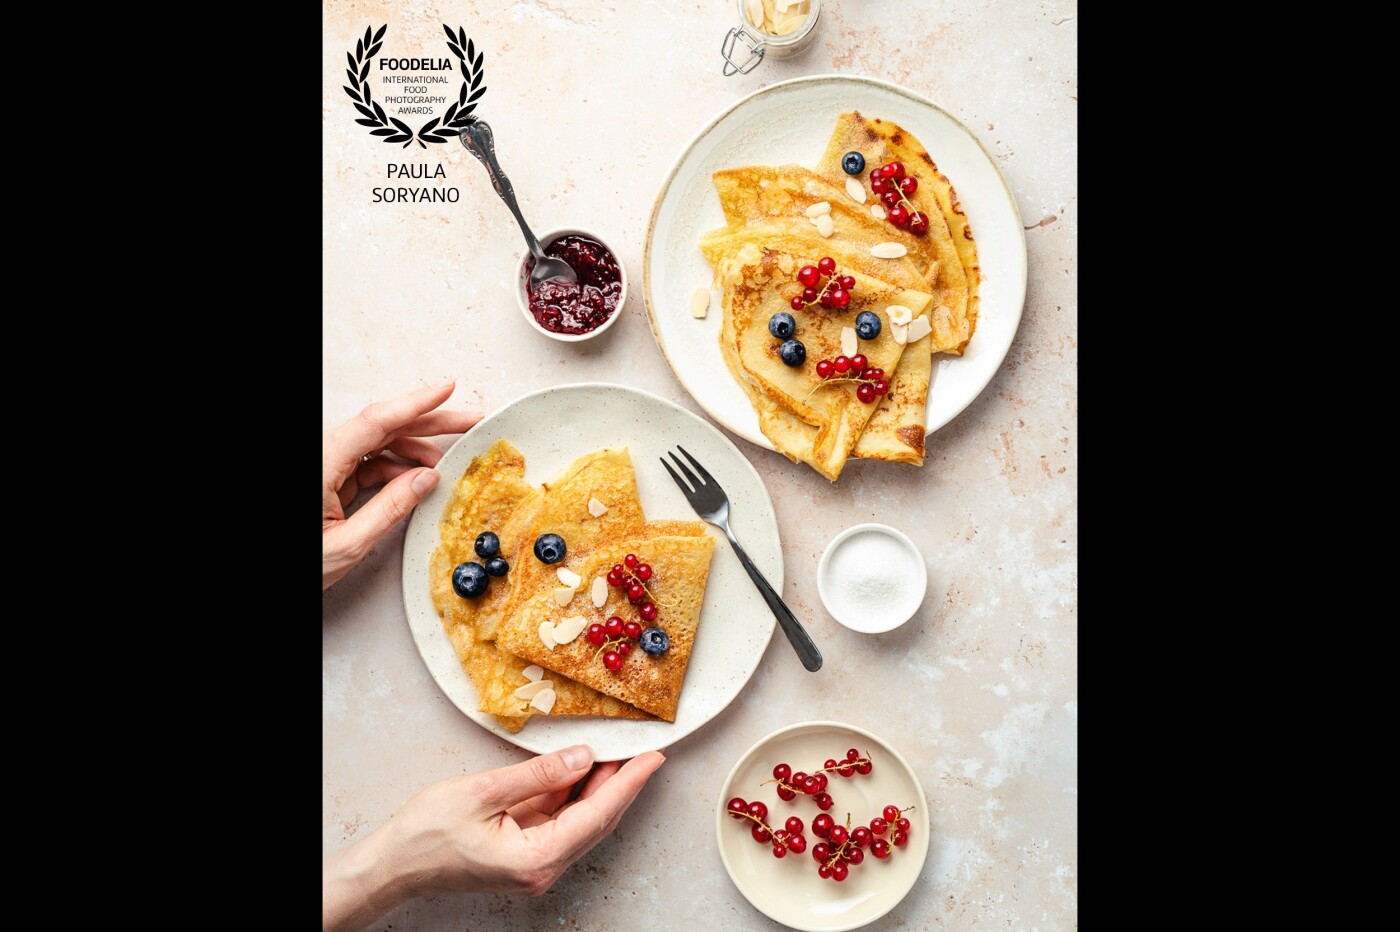 Join me for this summer crêpes party. <br />
A flatlay with homemade crêpes, styled with berries, sugar and almonds. <br />
I wanted to achieve something soft, airy and colorful, without ignoring the beautiful light-brown of those delicate layers. Sugar or jam for you?